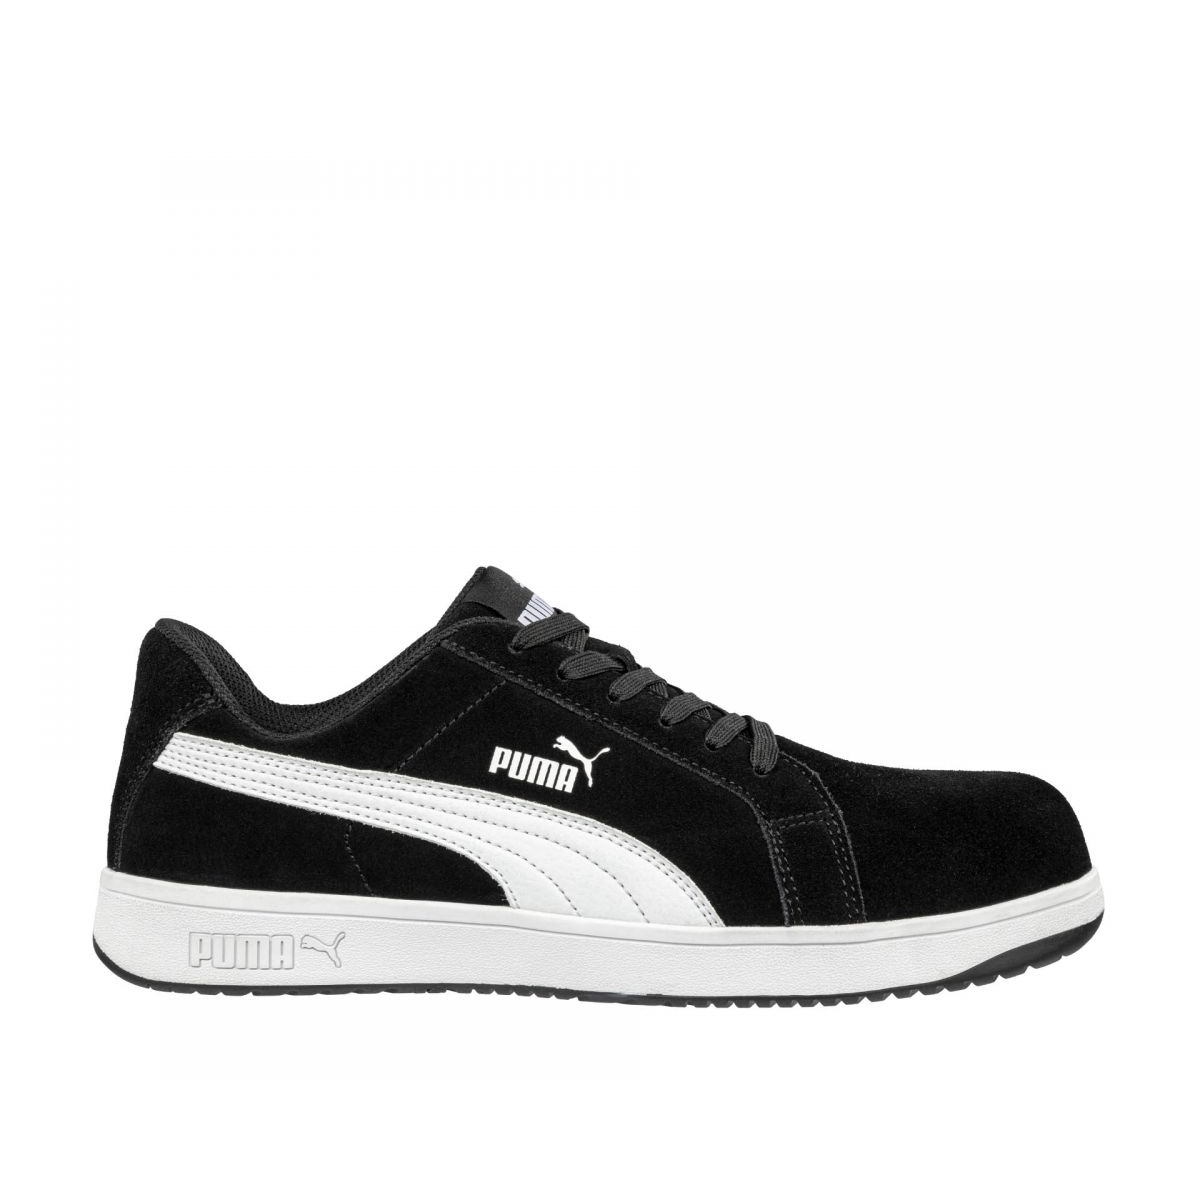 PUMA Safety Men's Iconic Low Composite Toe EH Work Shoes Black Suede - 640015 ONE SIZE BLACK - BLACK, 8.5